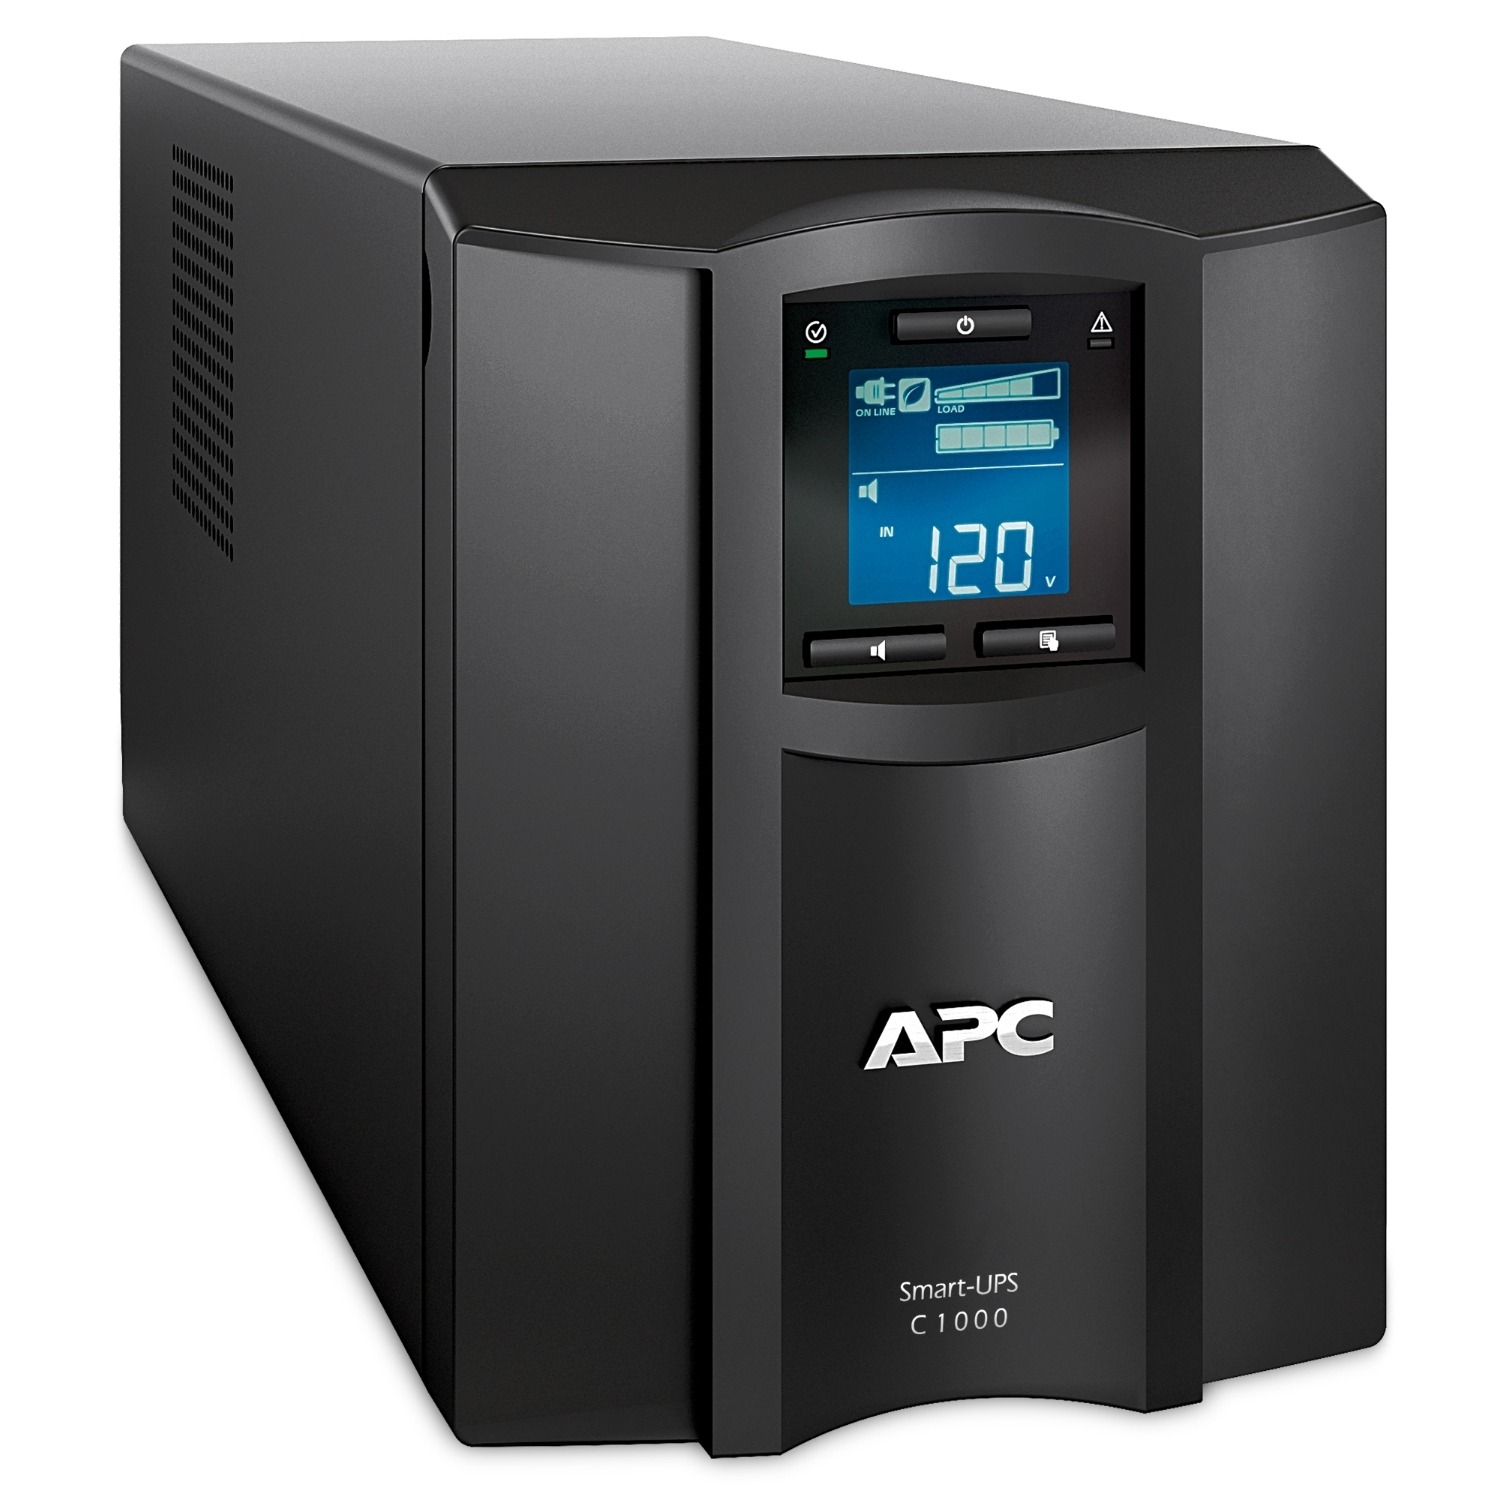 APC Smart-UPS C, Line Interactive, 2000VA, Tower, 230V, 6x IEC C13+1x IEC C19 outlets, USB and Serial communication, AVR, Graphic LCD